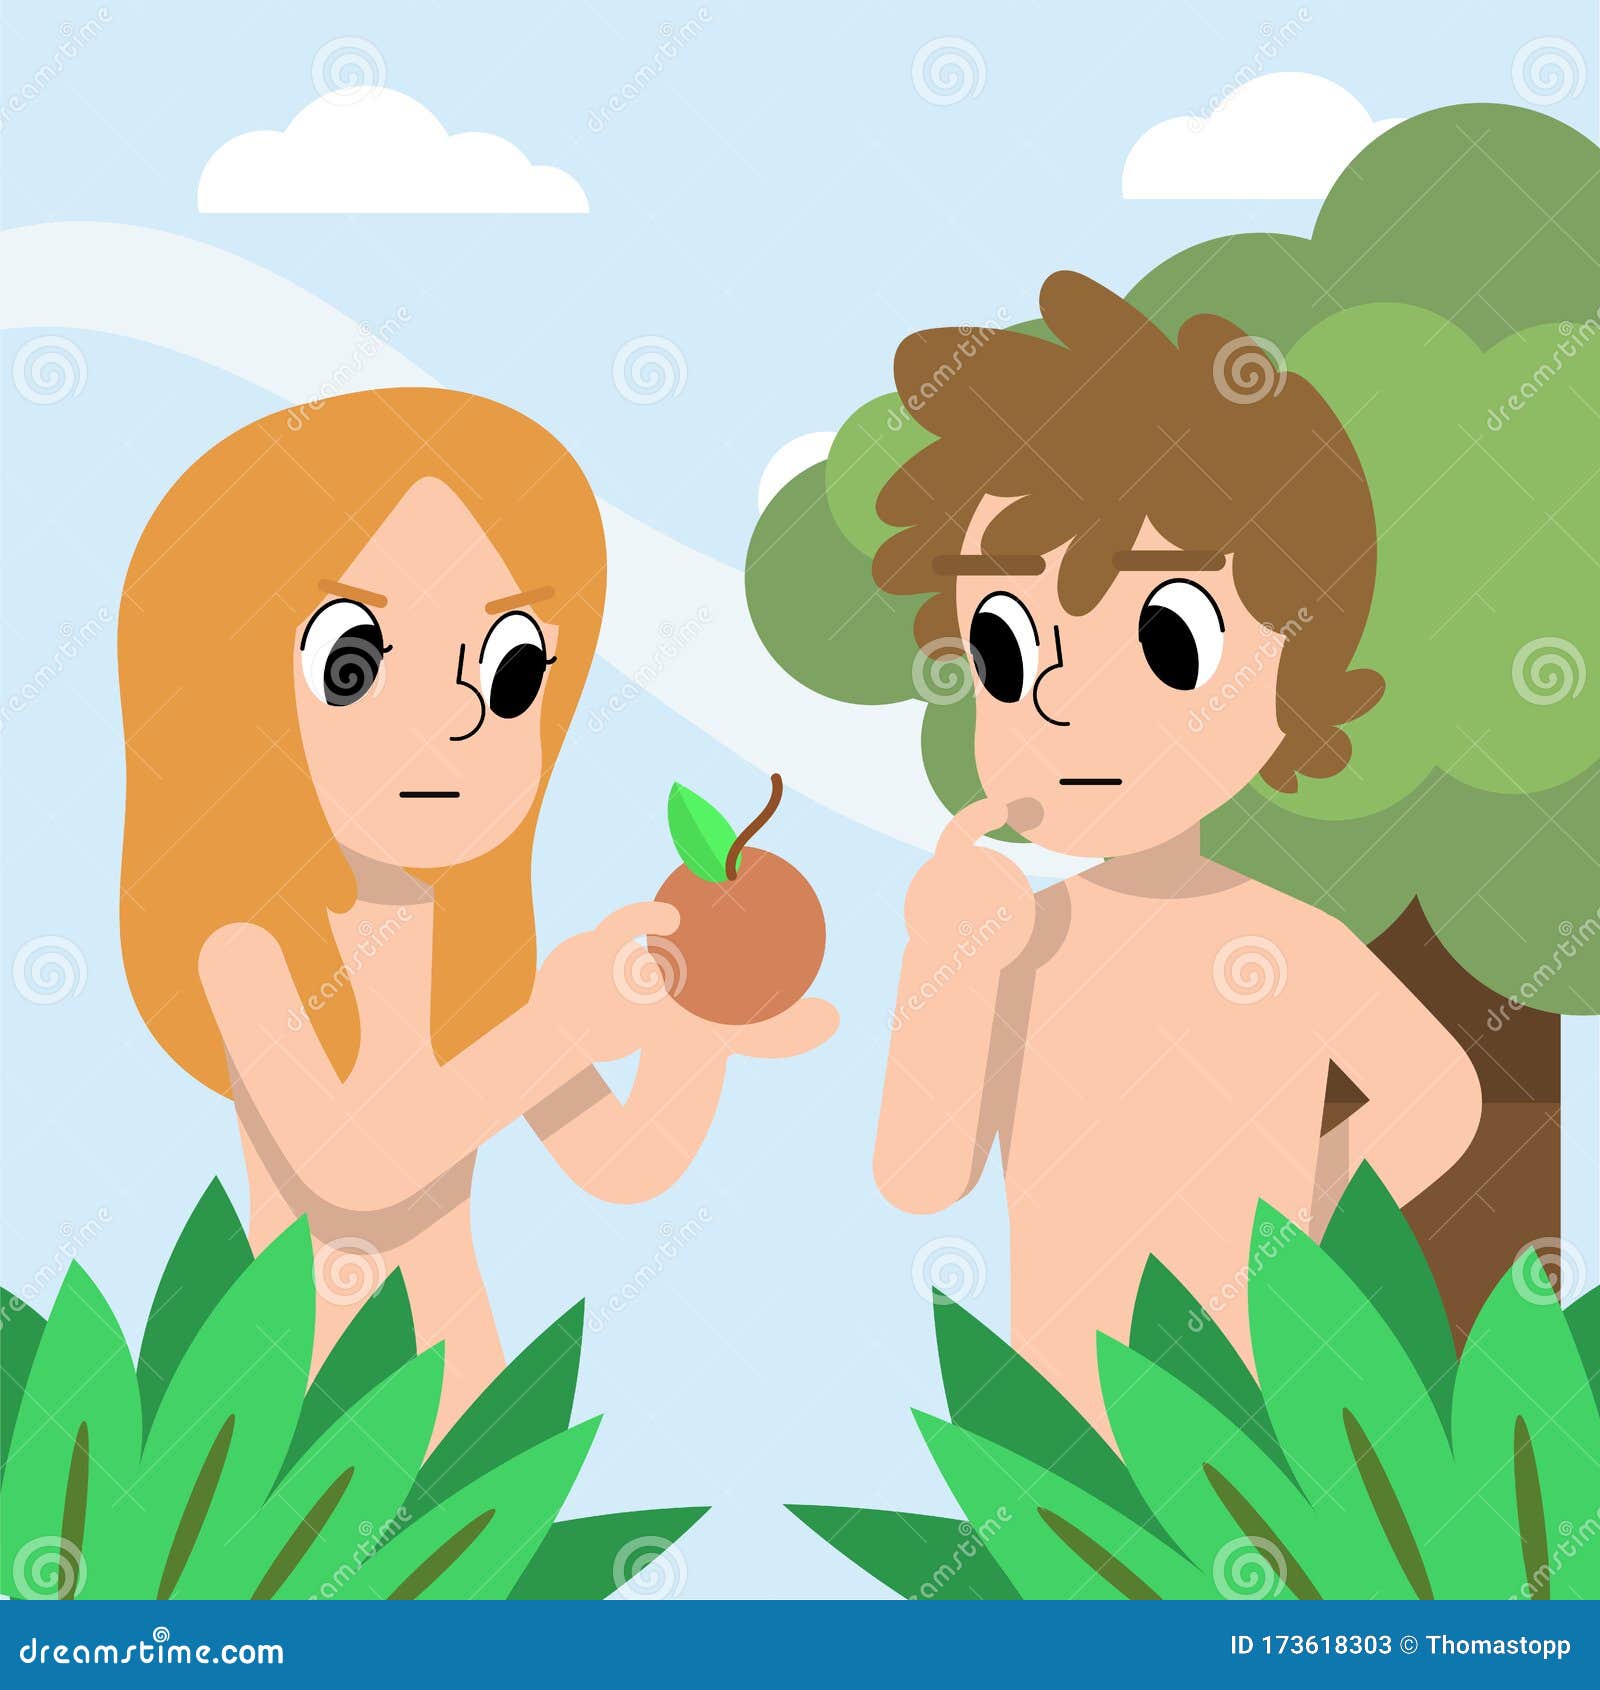 A Cartoon Vector of Adam and Eve Looking at the Fruit. Illustration. Bible  Stories Stock Vector - Illustration of awareness, eden: 173618303